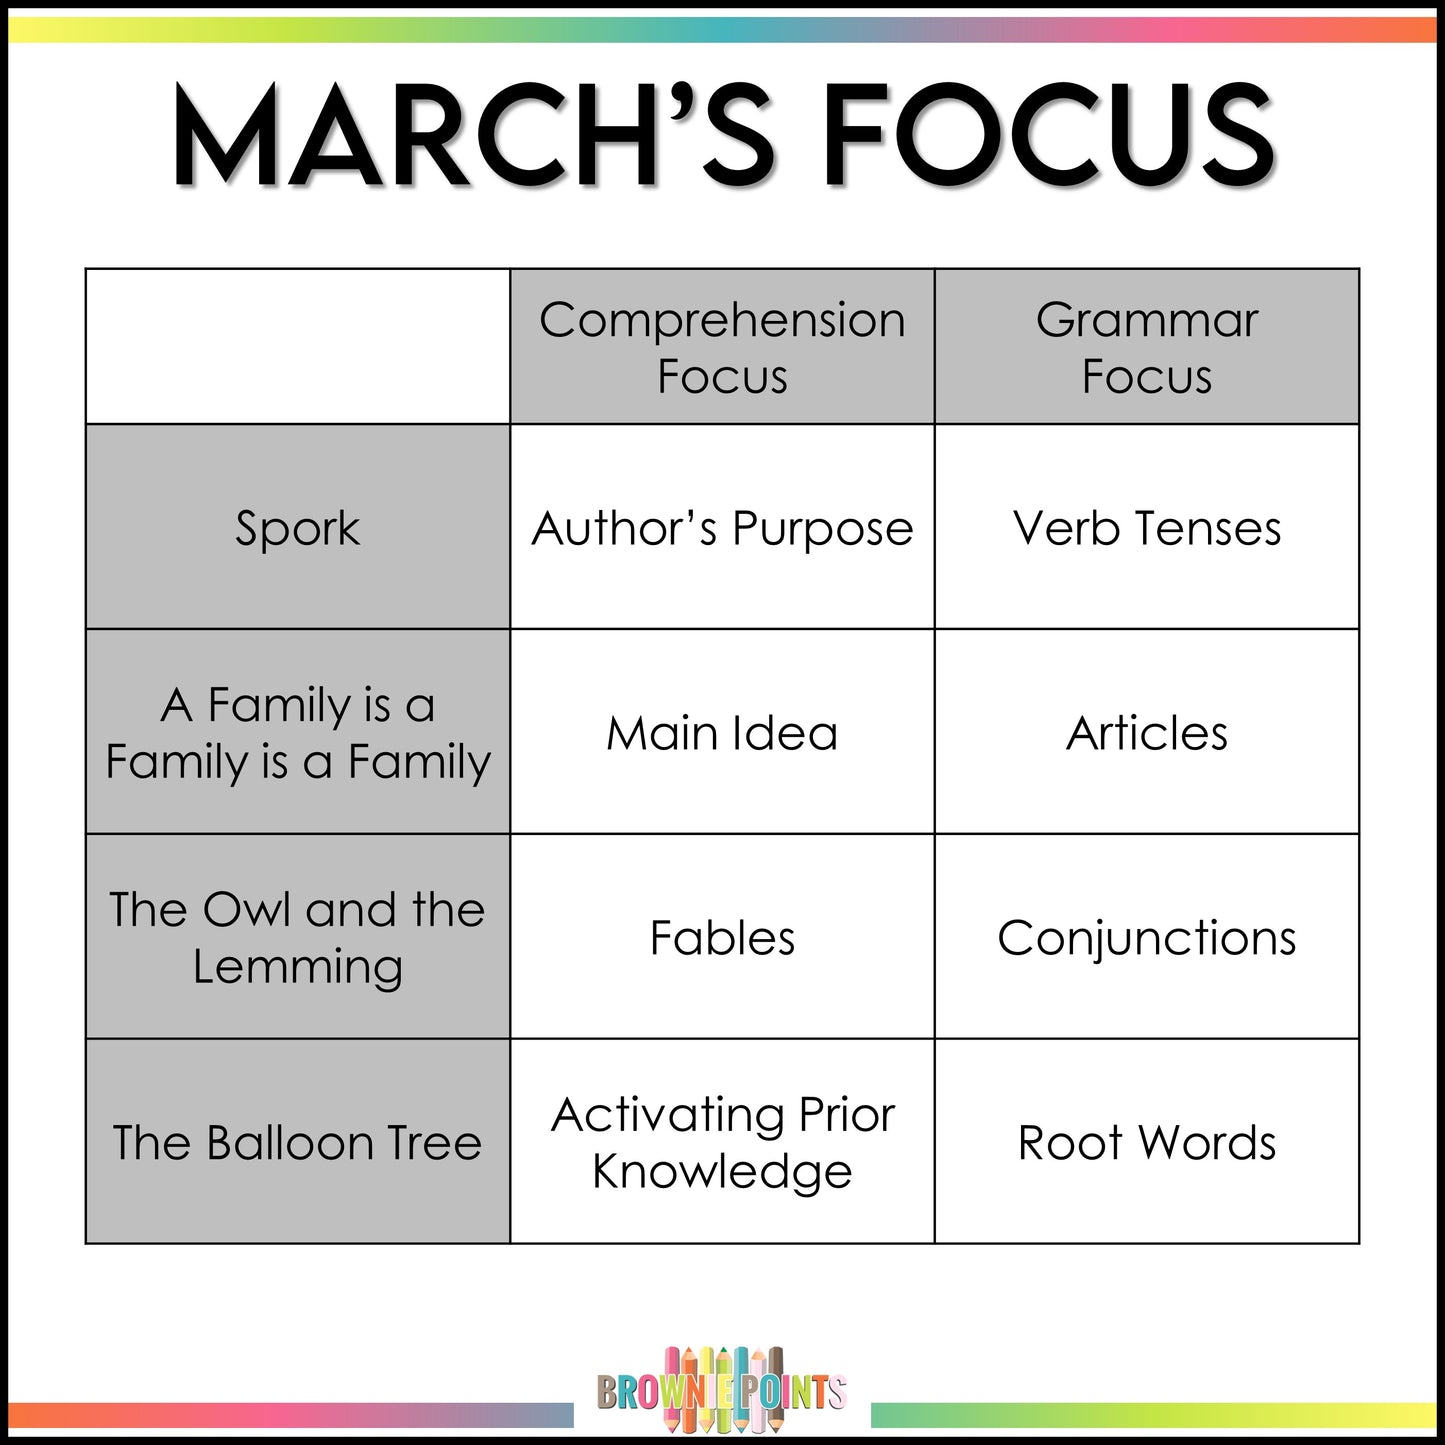 Maple Leaf Reads - March